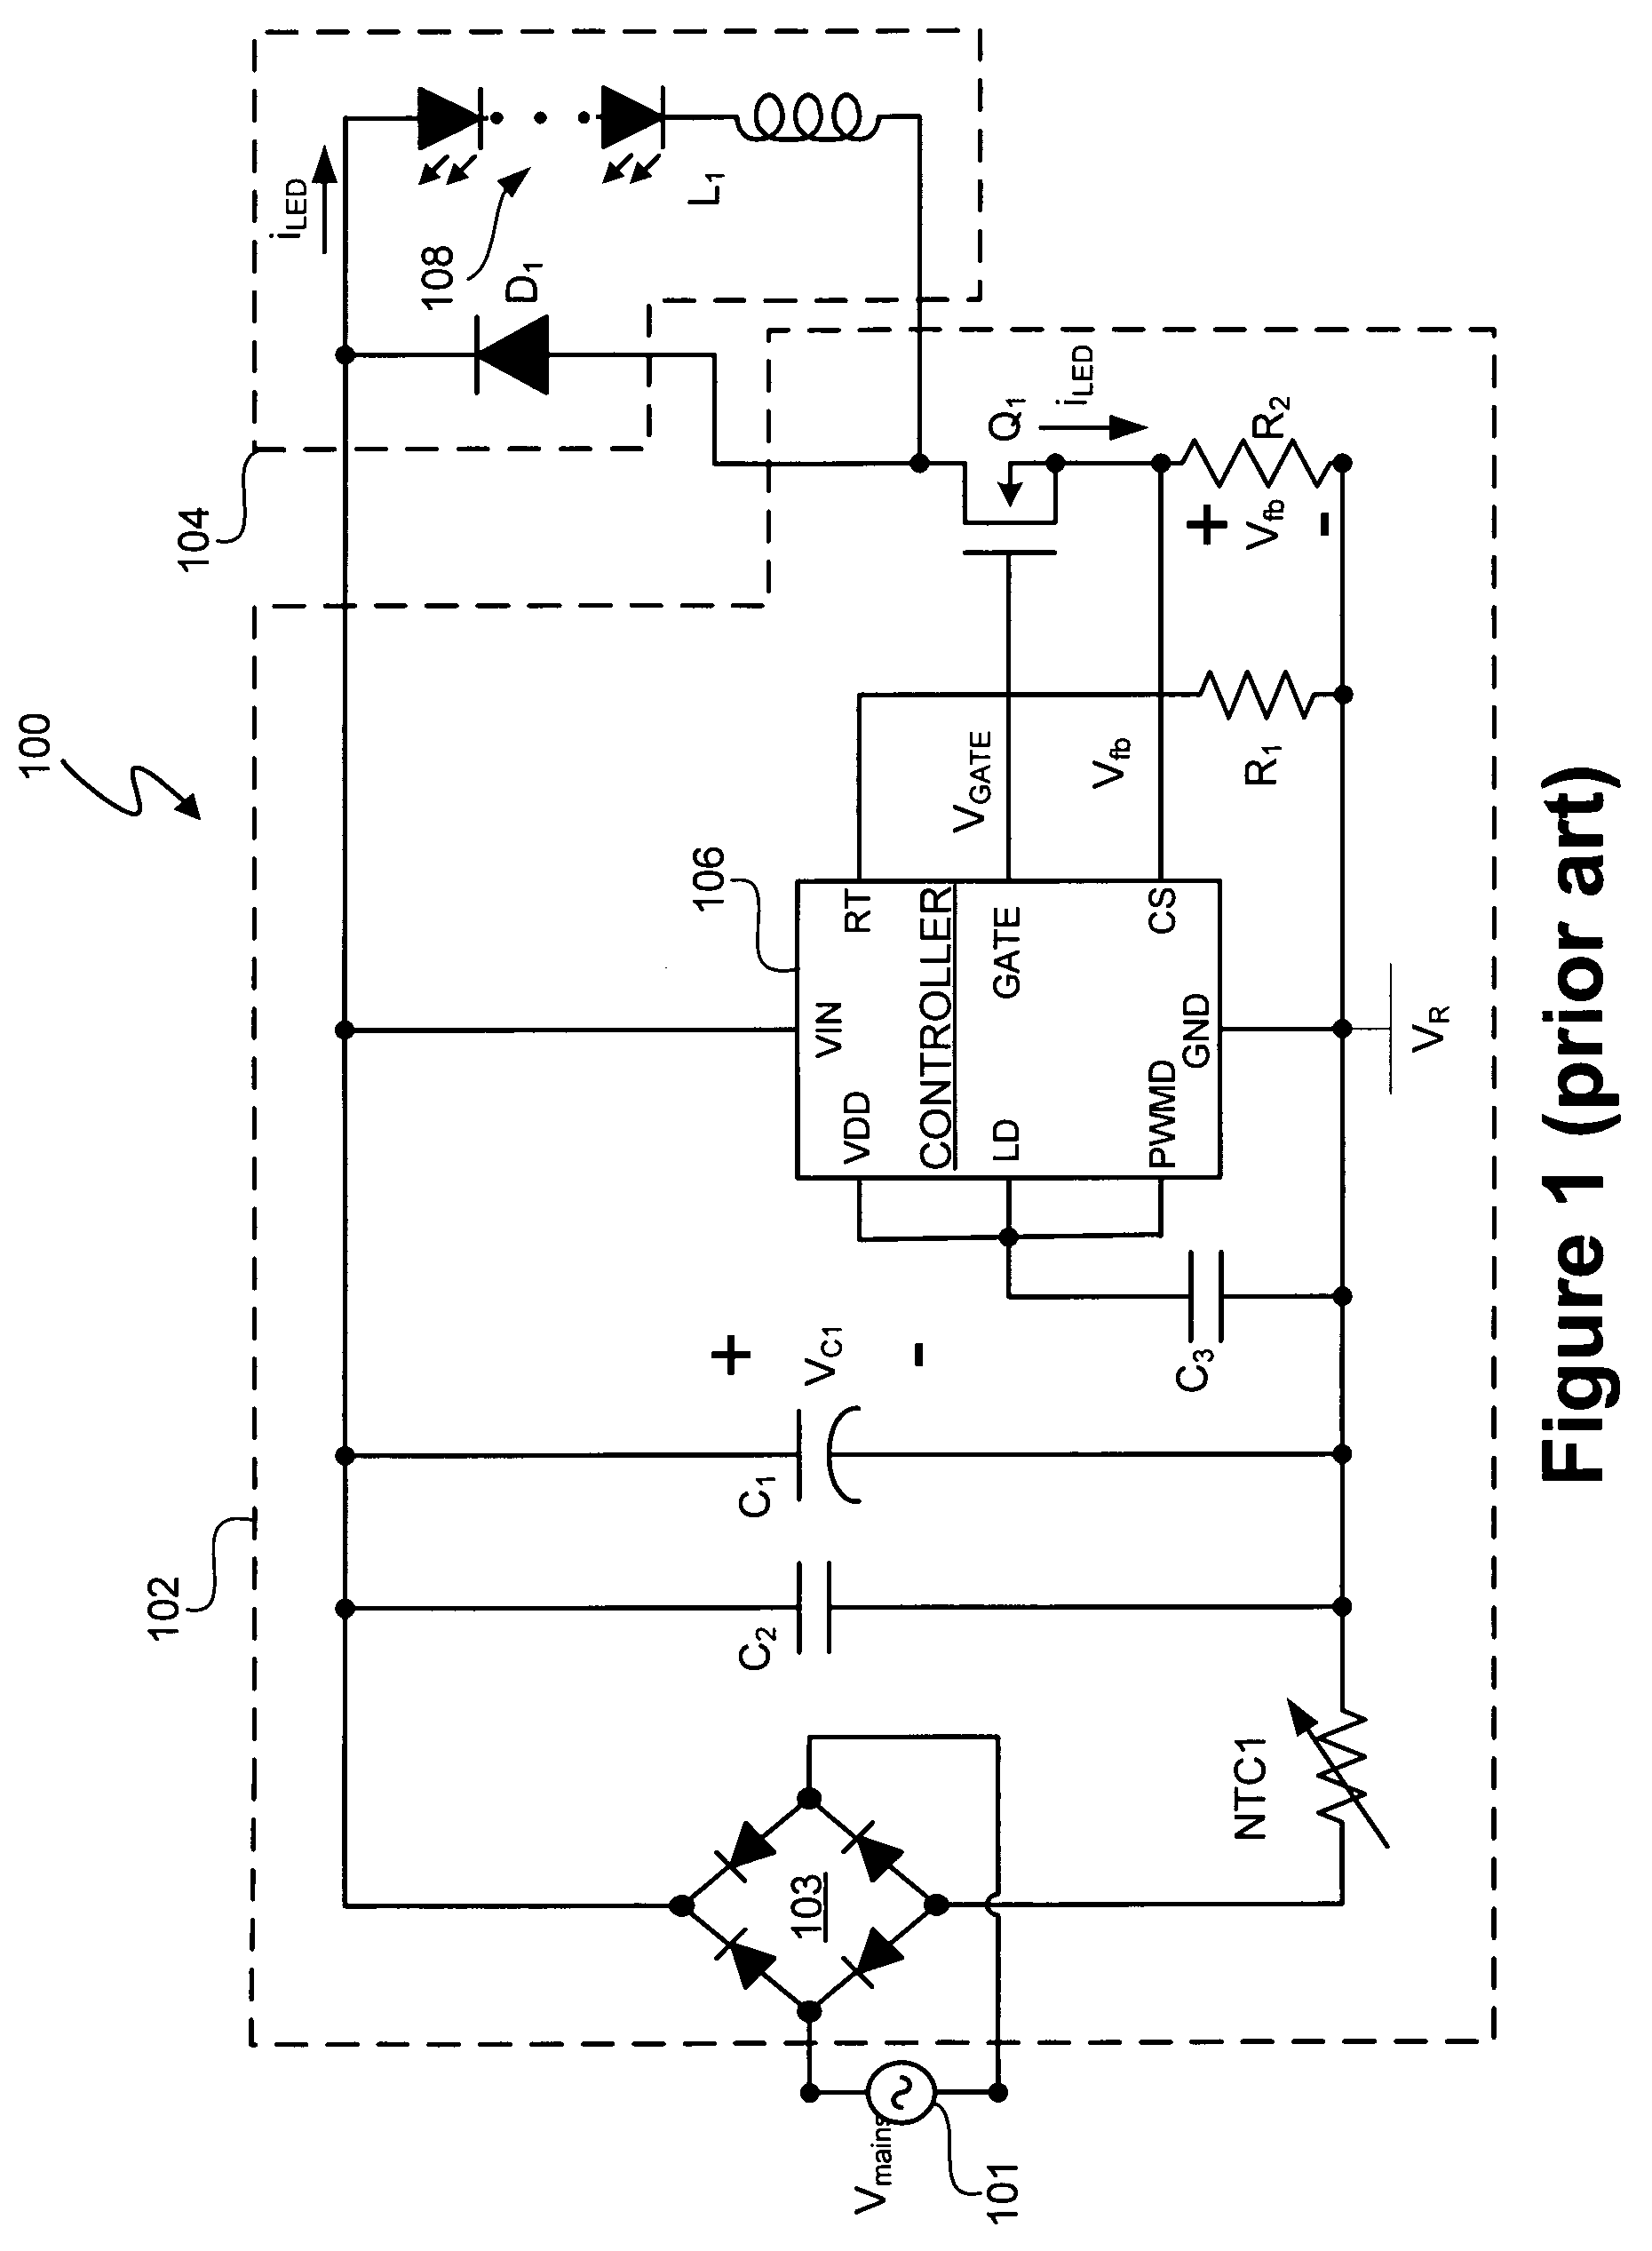 Power control system for current regulated light sources